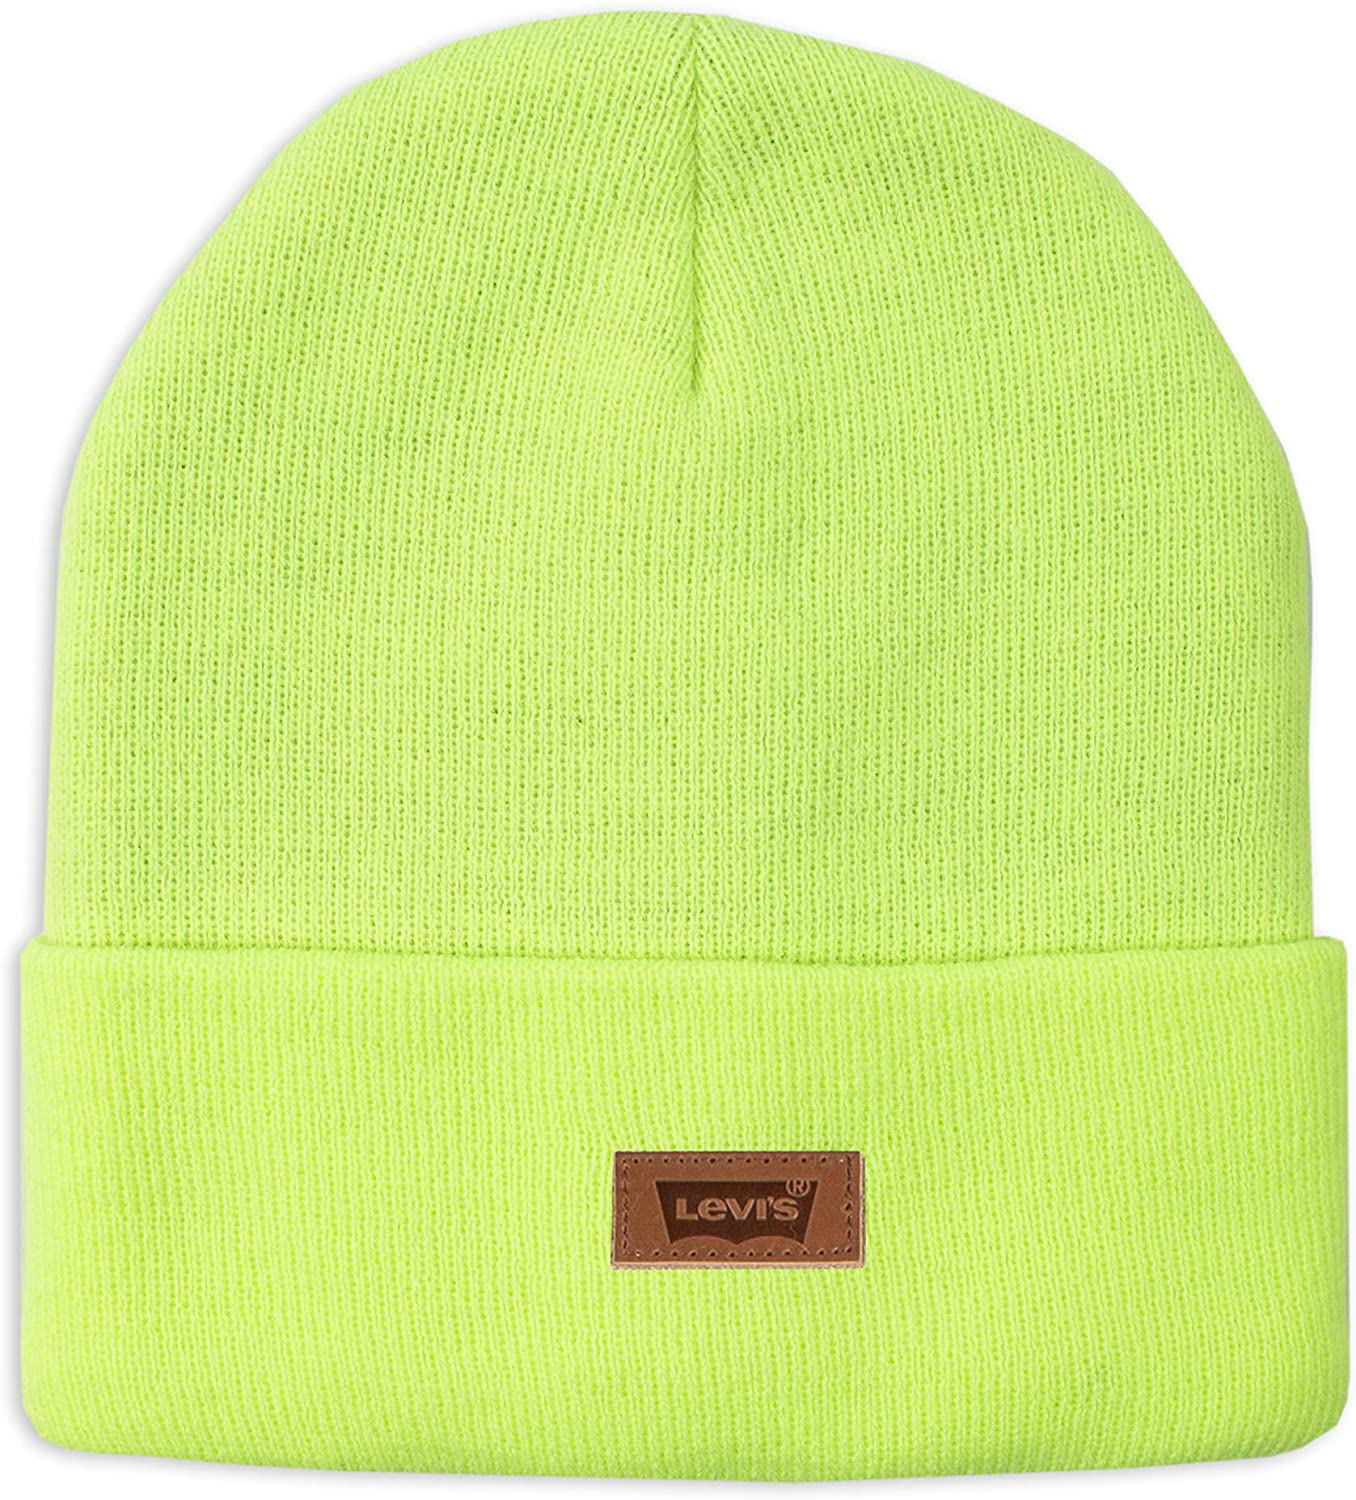 Levi's Knit Cuffed Neon Yellow Solid Men's Beanie